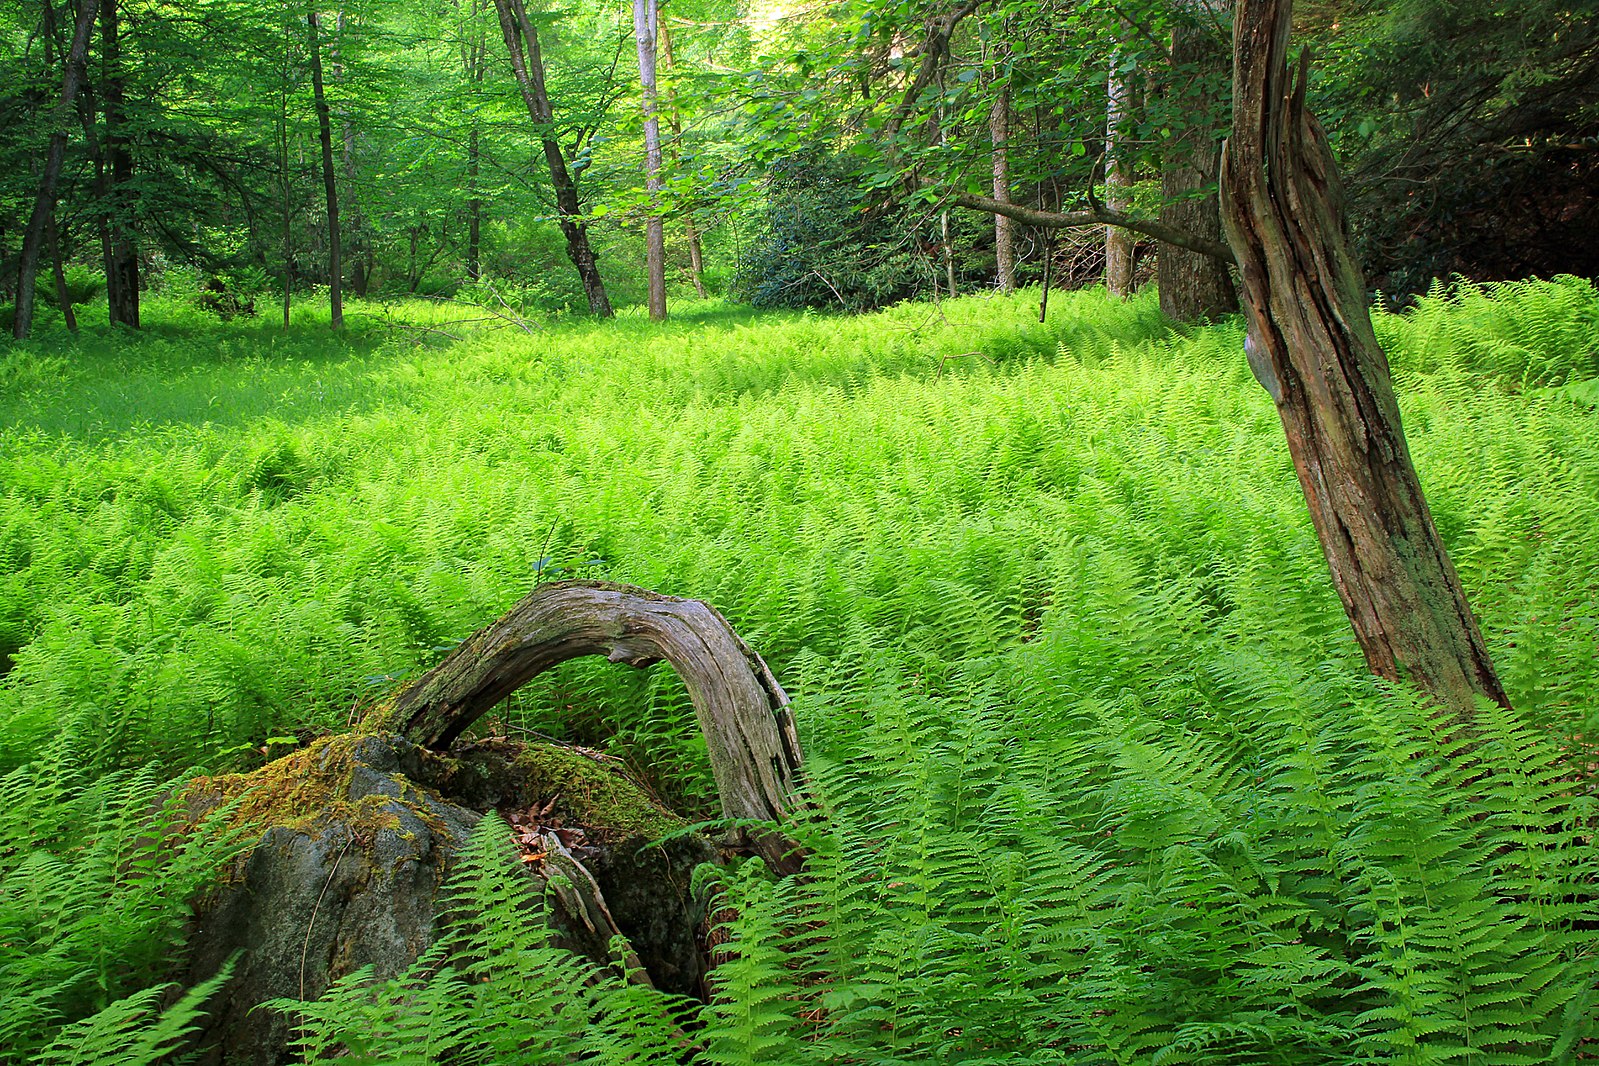 Ferns grow completely along the floor of a wood, several trees grow out from below the moss to above